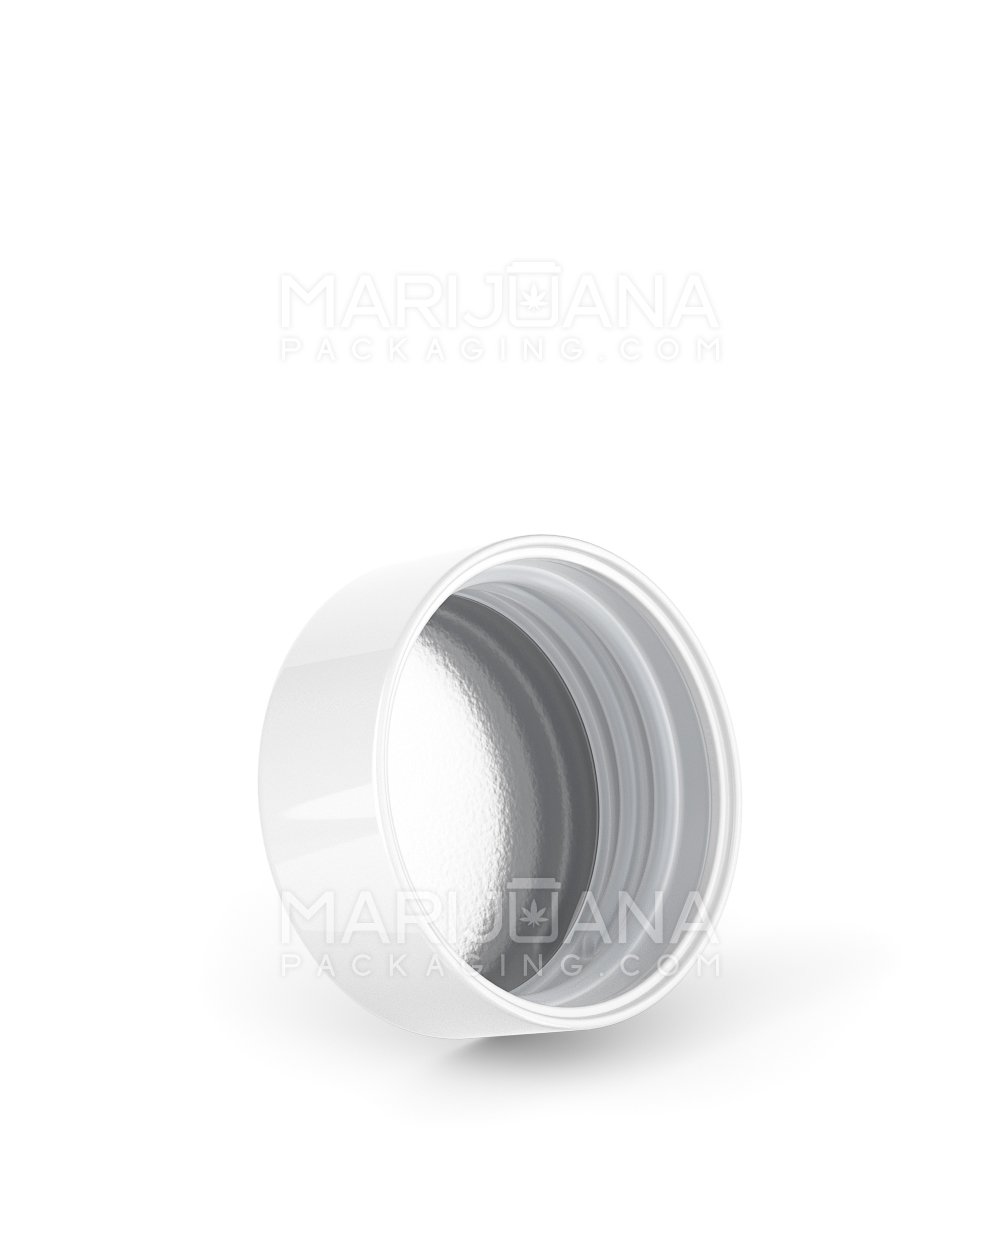 Child Resistant | Smooth Push Down & Turn Plastic Caps w/ Foil Liner | 38mm - Glossy White - 320 Count - 2